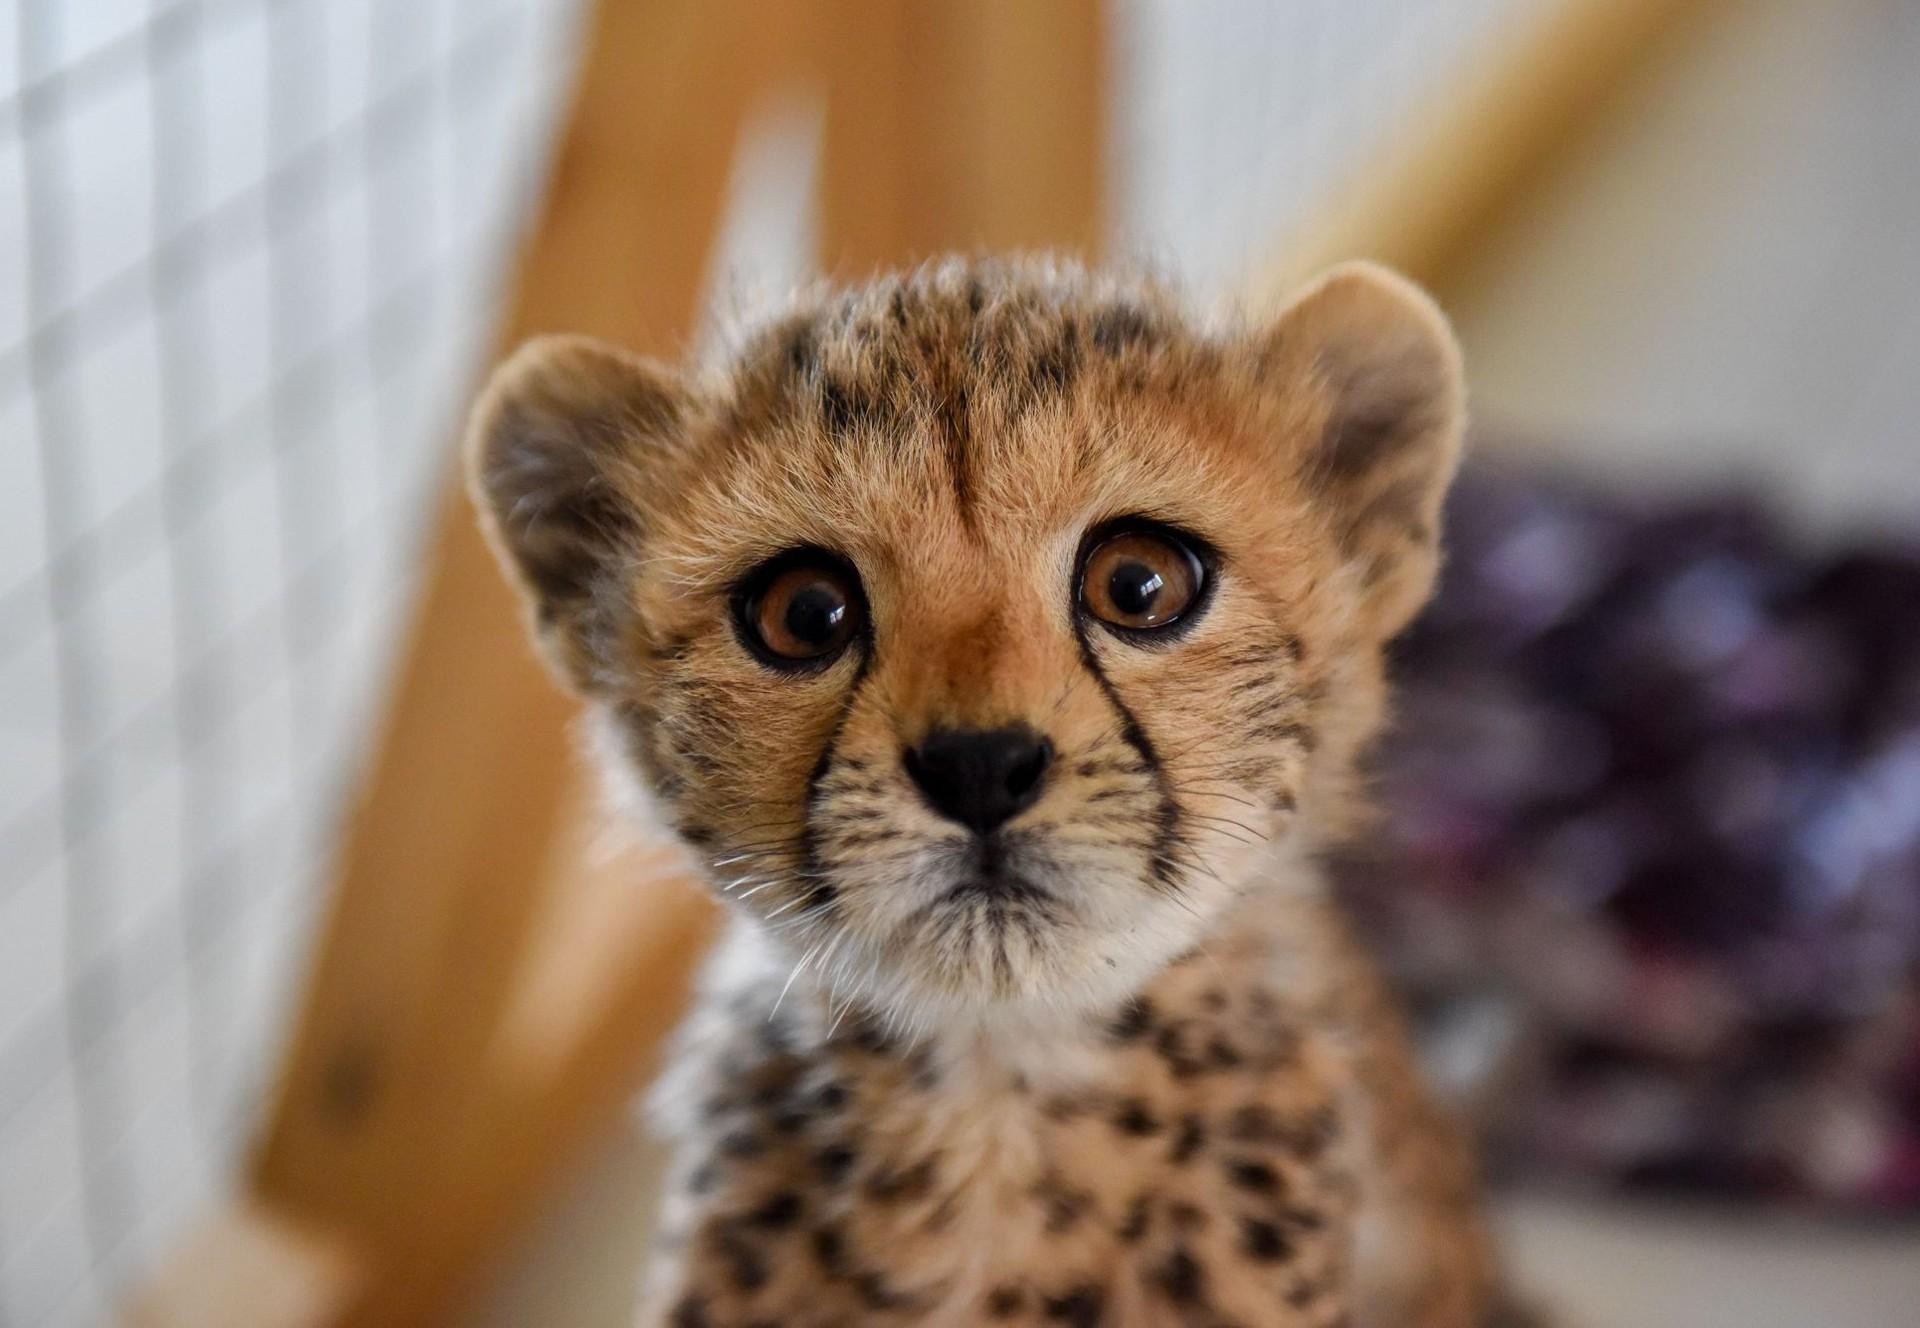 29 orphaned cheetahs in Somaliland in need of food and supplies - FOUR PAWS  International - Animal Welfare Organisation